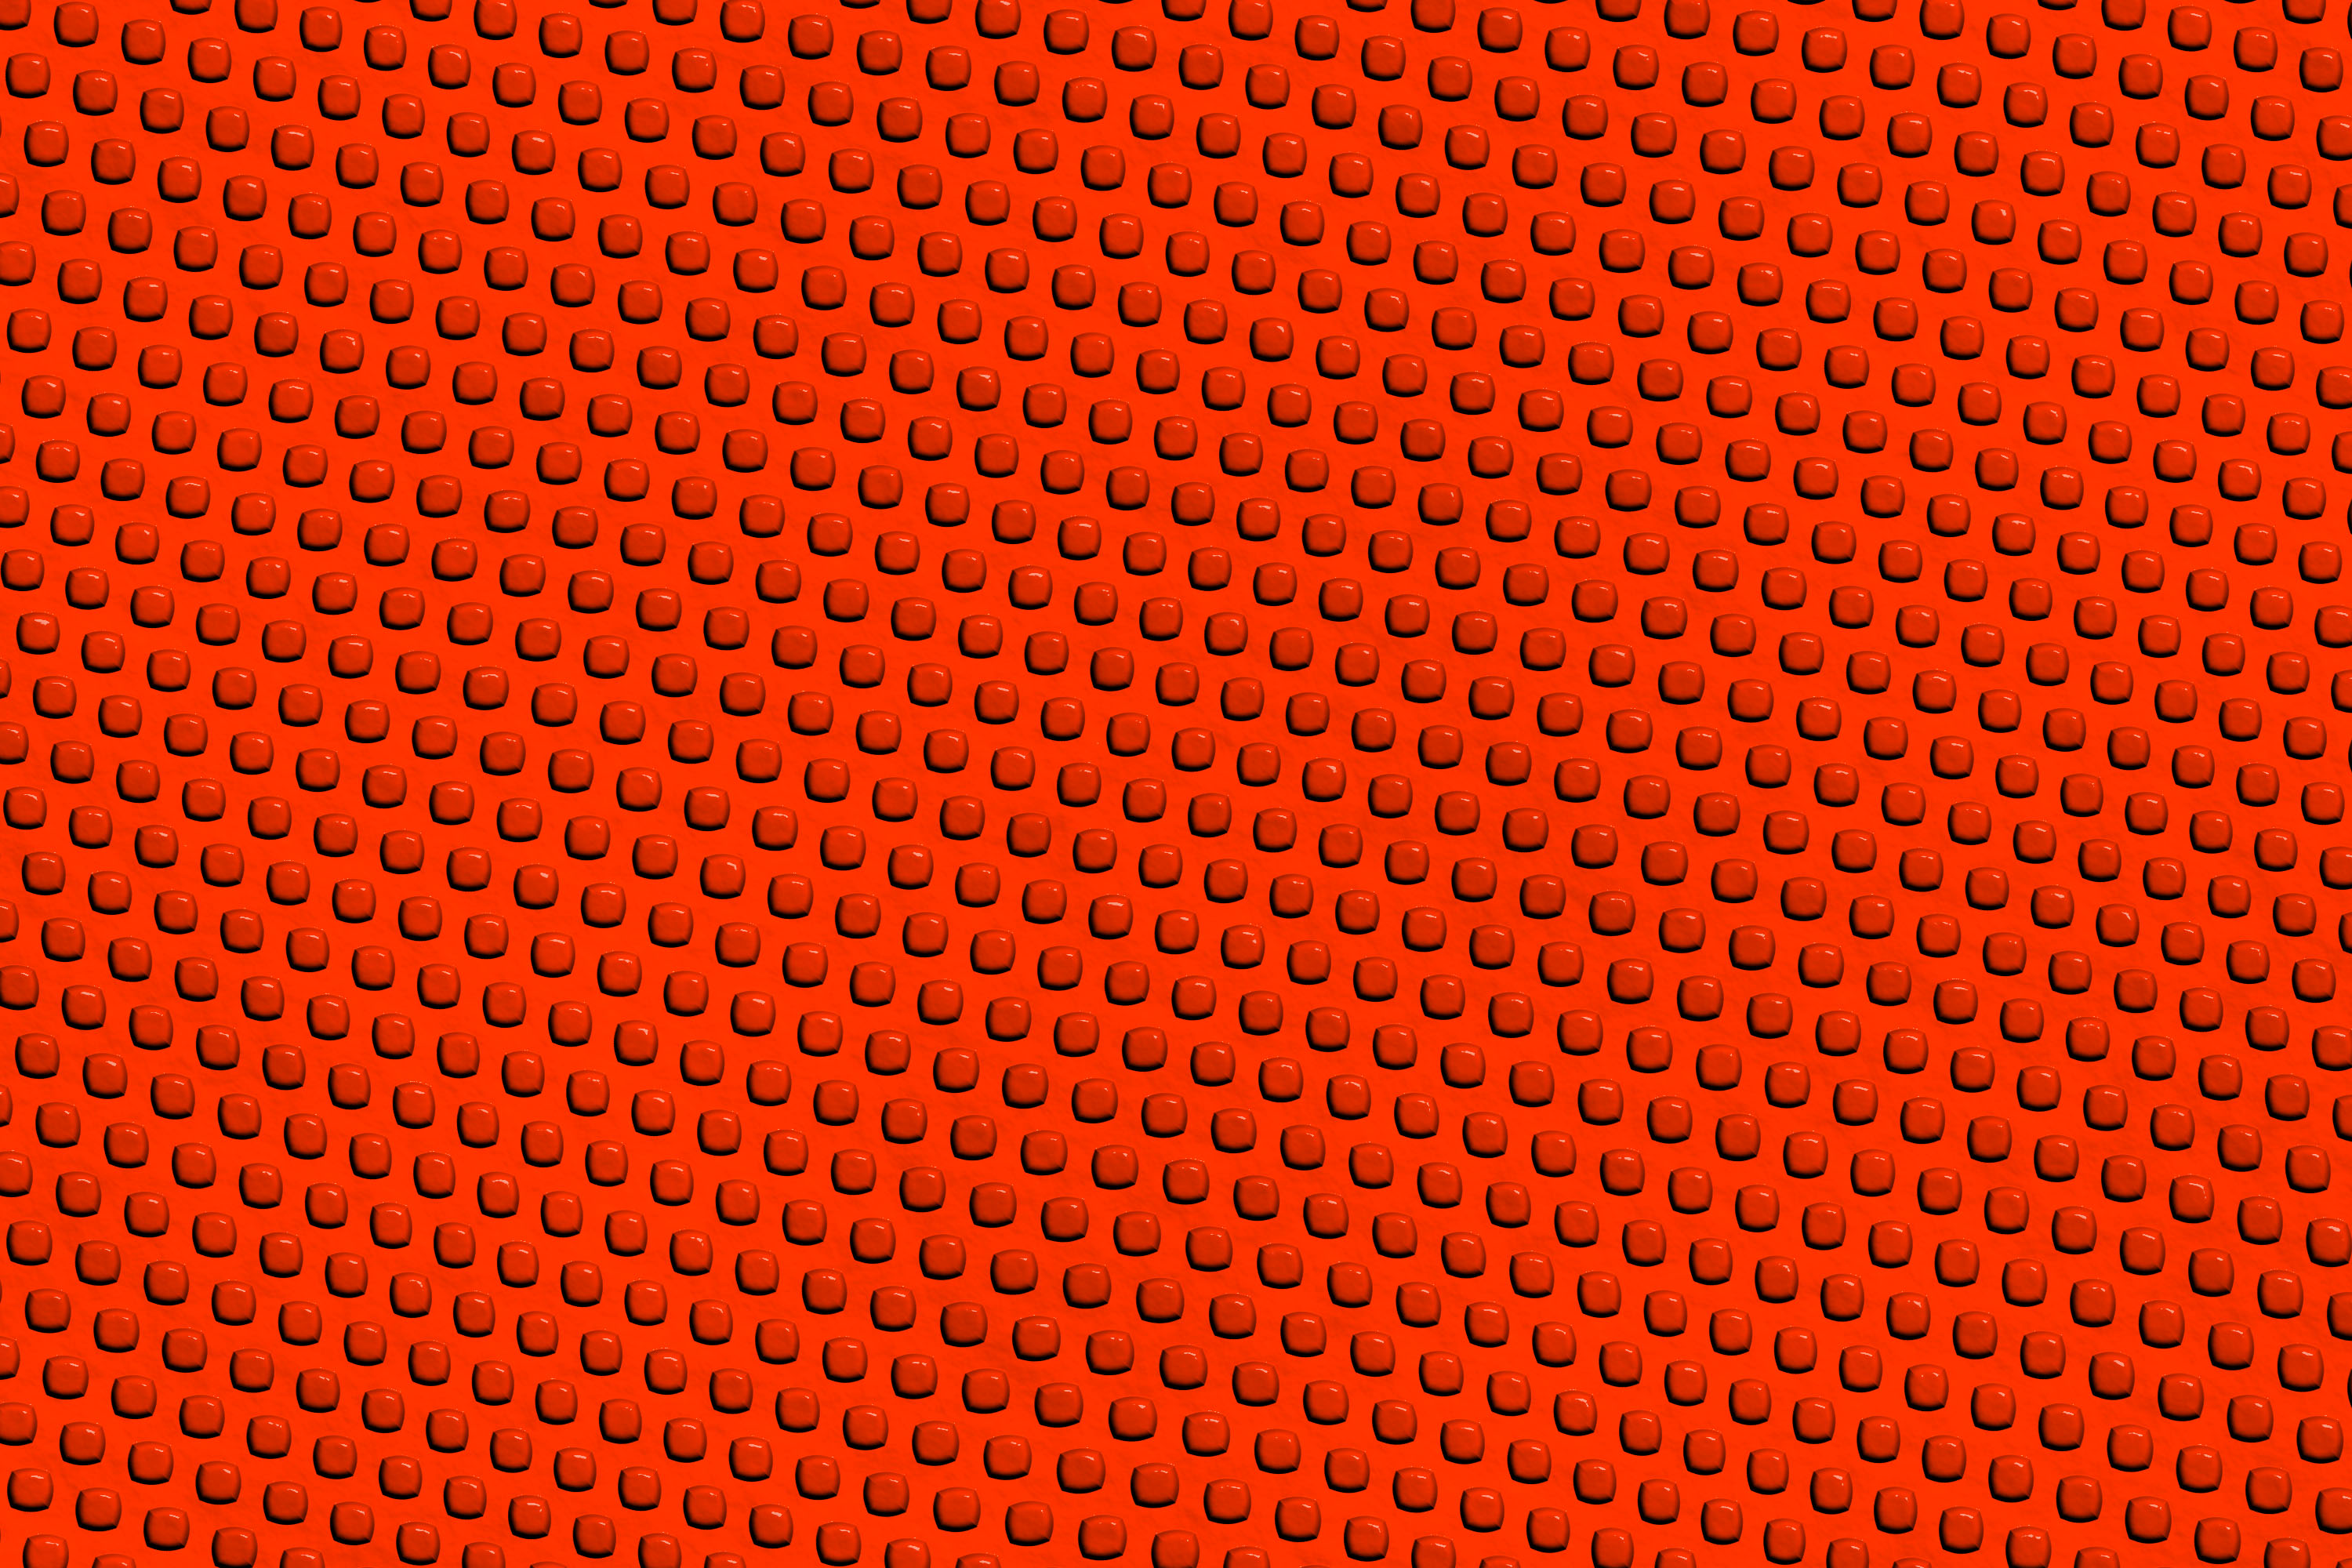 Abstract Pattern Texture Orange Color 3000x2000